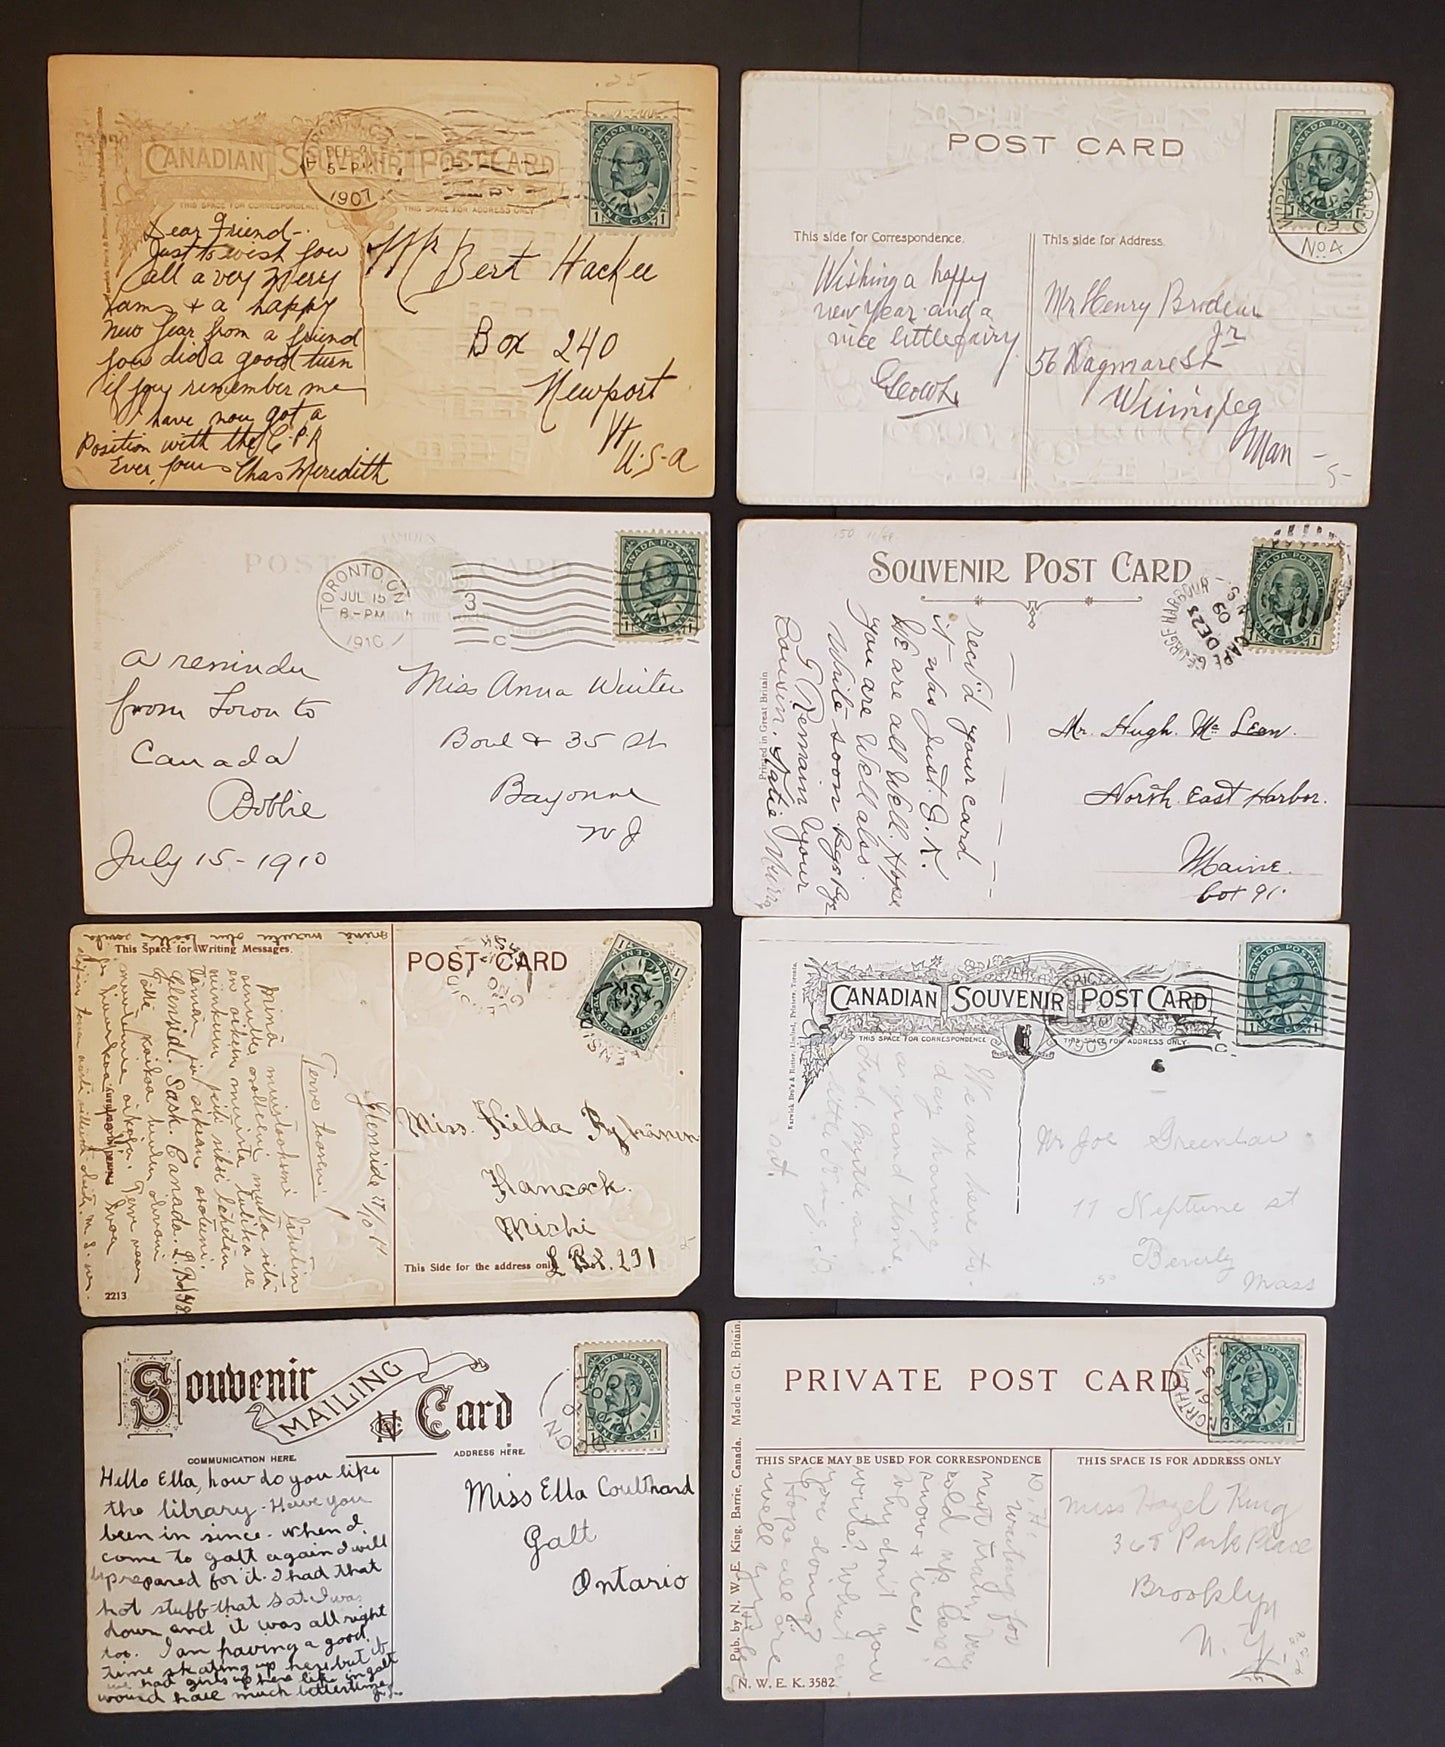 Lot 69 Canada #89-89iii 1c Green King Edward VII, 1903-1911 King Edward VII Issue, 8 Postcards franked With 1c Stamps, Sent Domestically and to US, Variety of Shades, VF-VF, Variety of Subjects, Cat. $40, Est. $30